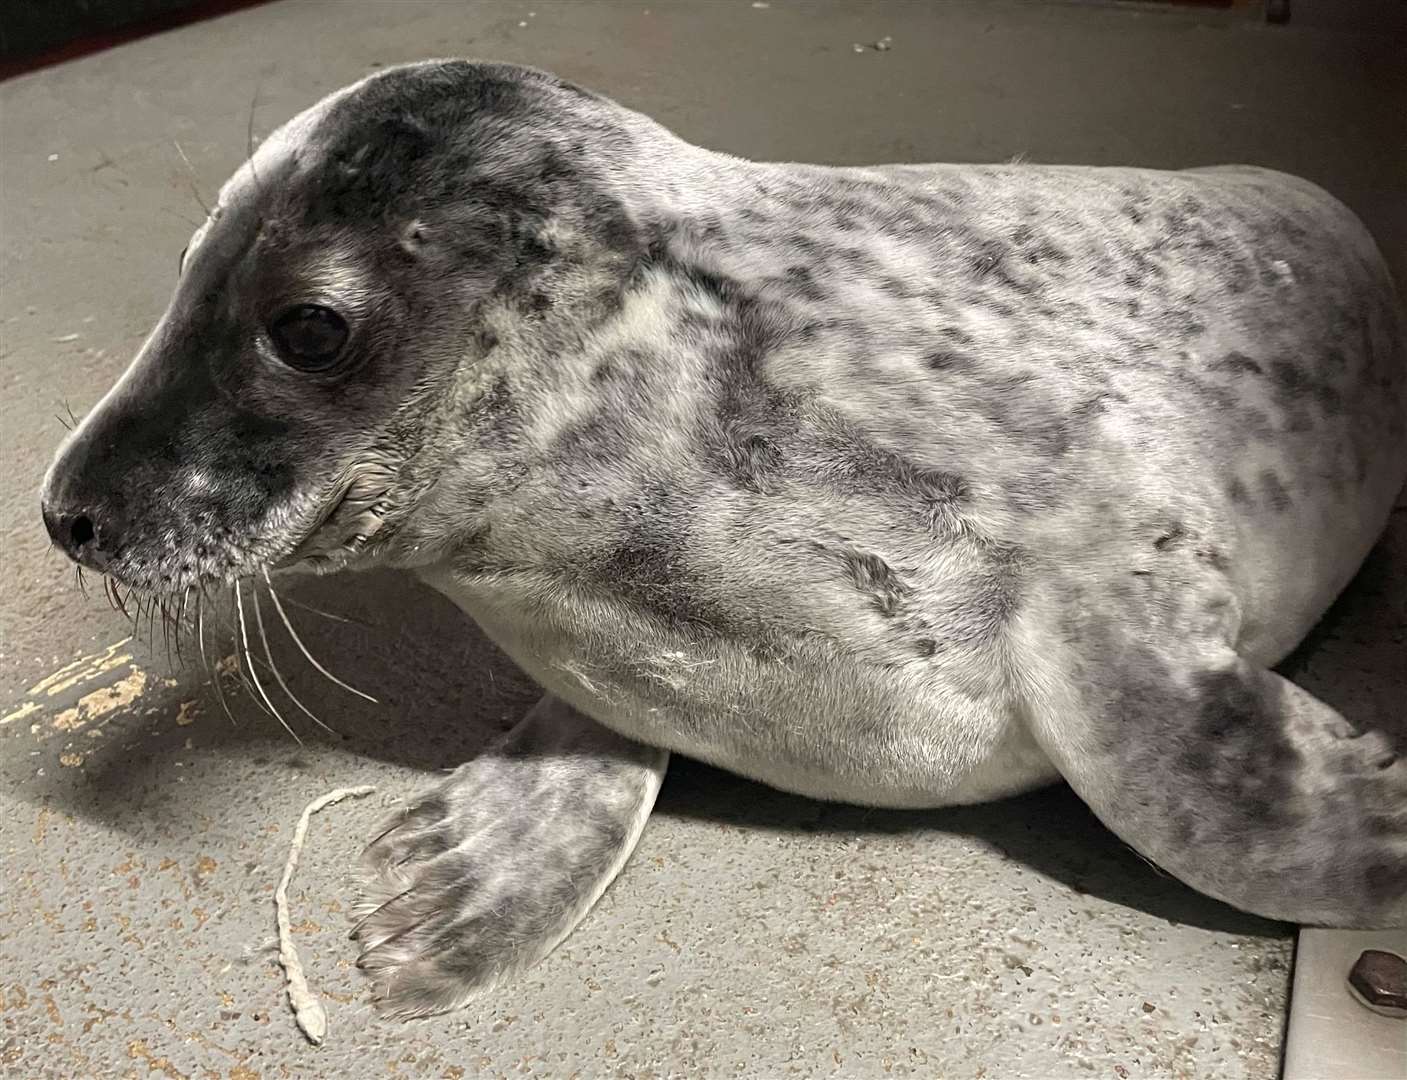 Mylo, now moulted all of his baby fur as a grown-up. Picture:Caithness Rehab and Release.